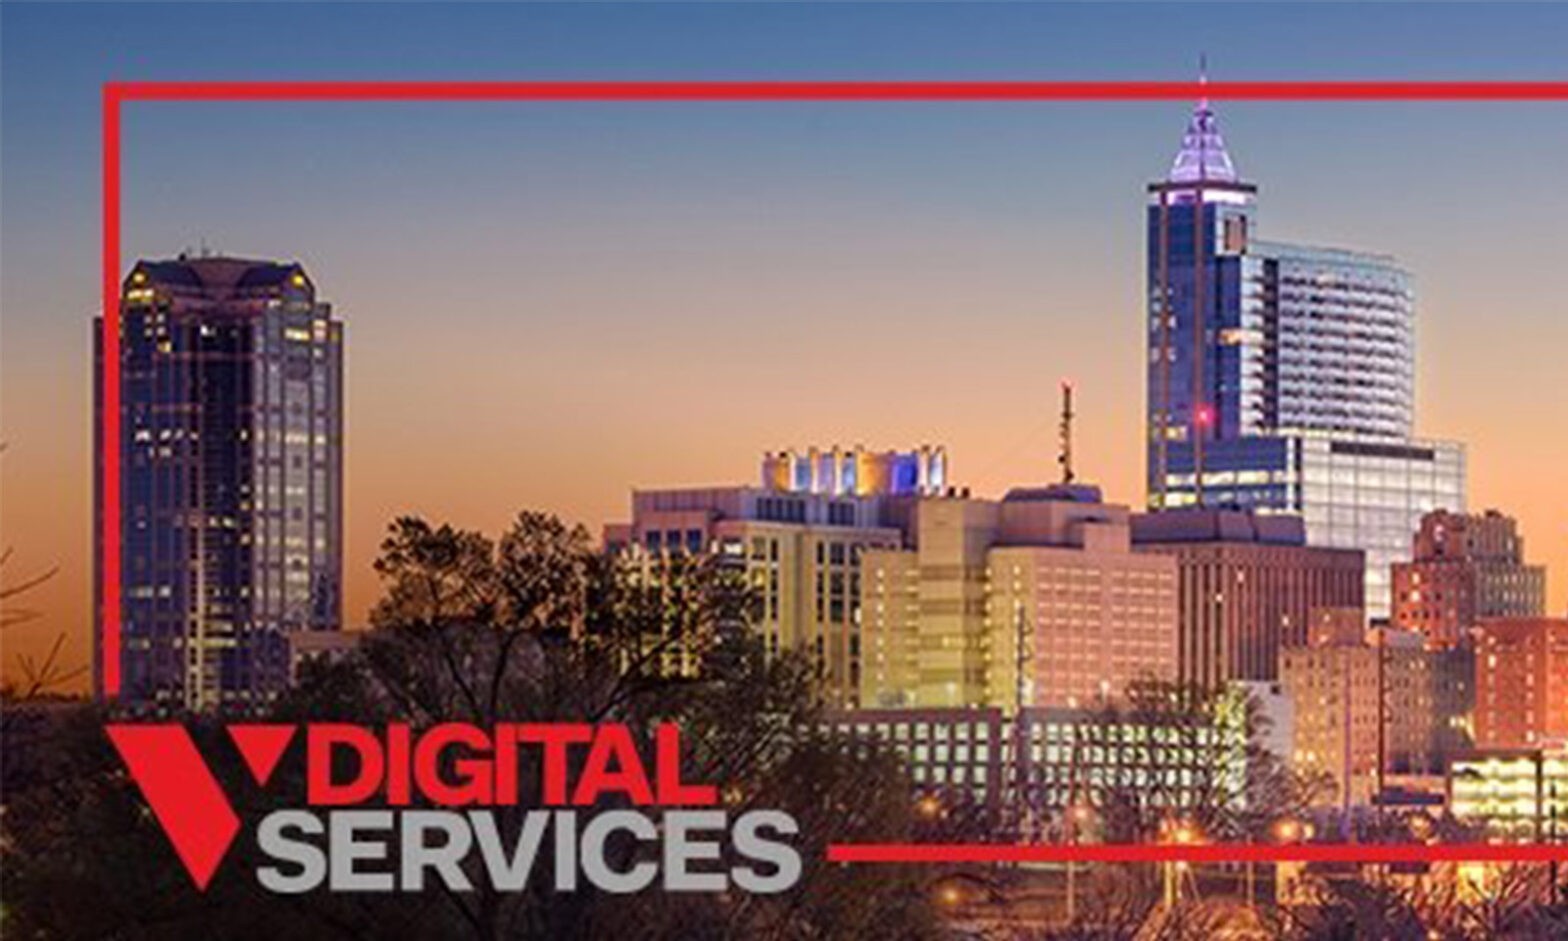 Featured image for post: V DIGITAL SERVICES OPENS A GATEWAY TO THE AMERICAN SOUTHEAST